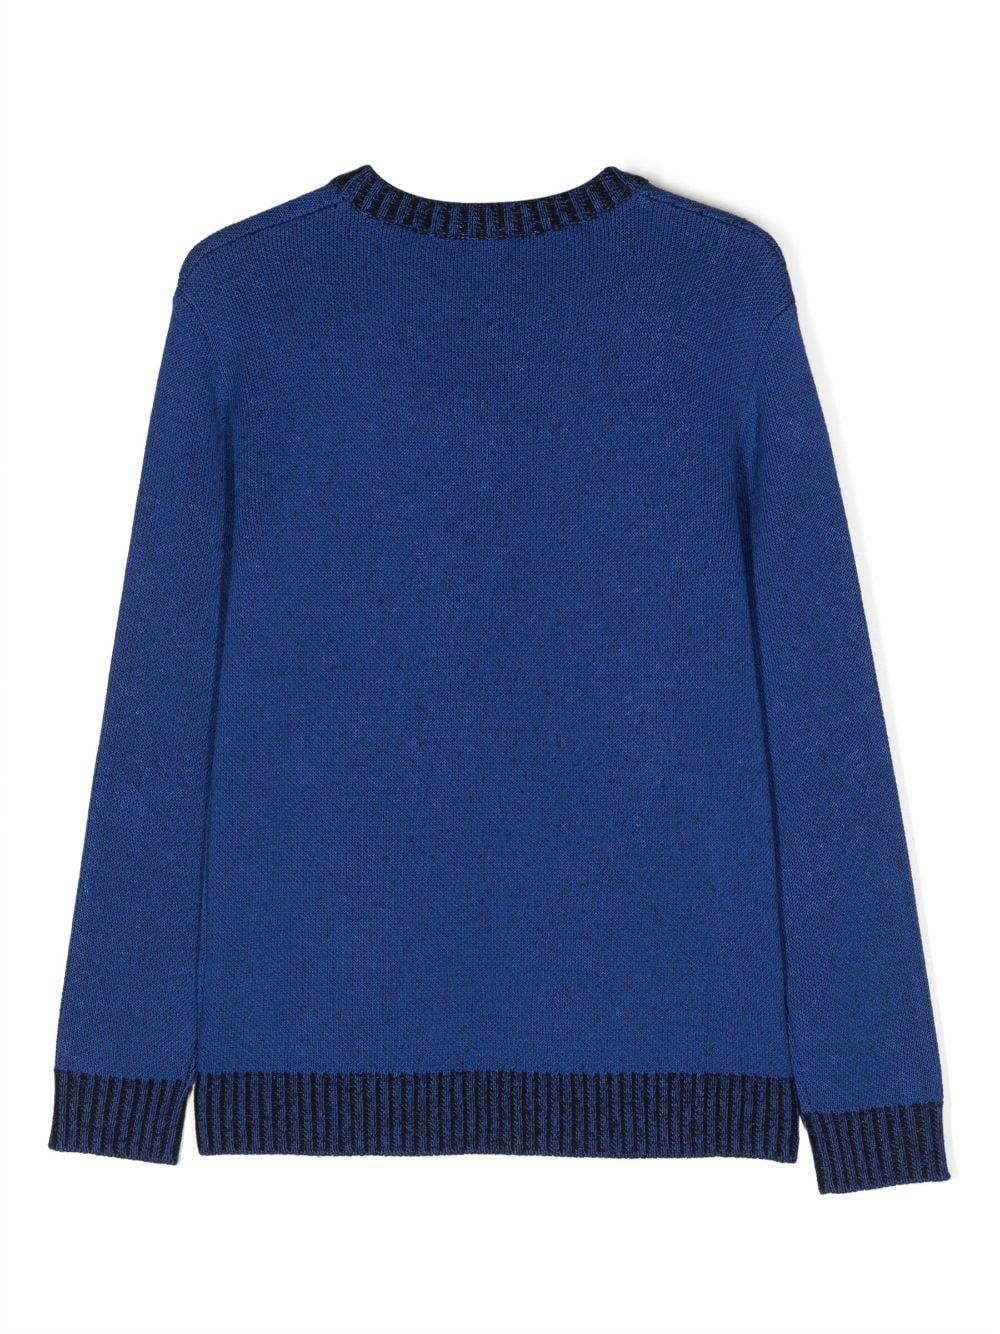 Blue sweater for boys with black logo